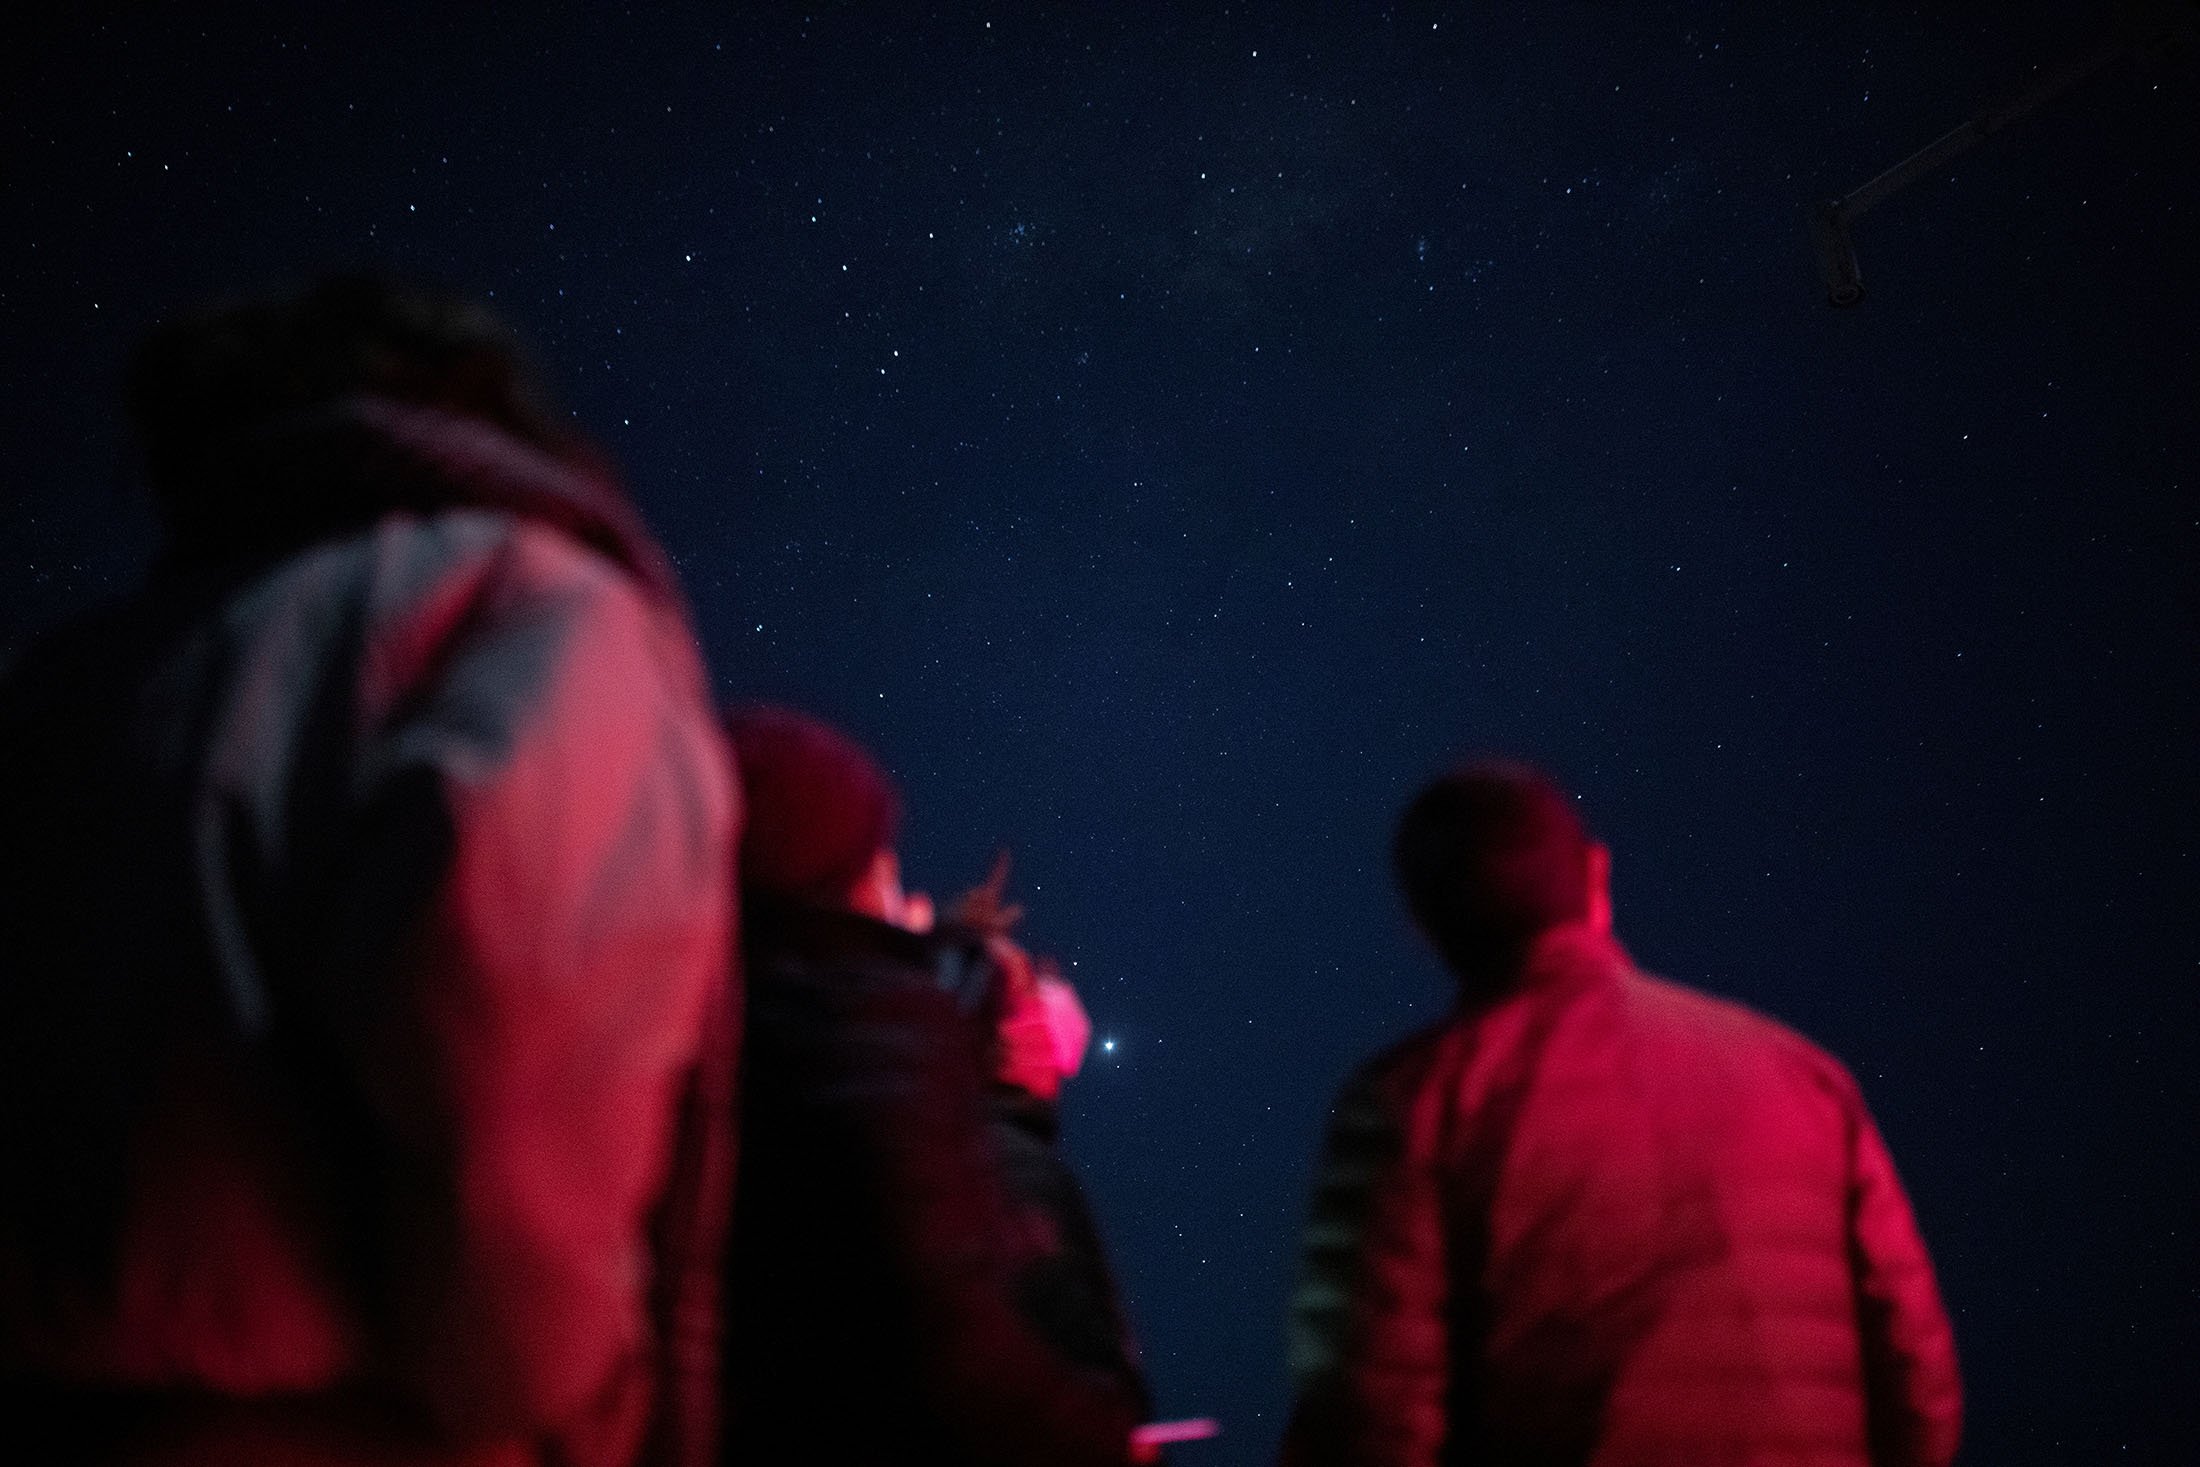 People look at the sky during a visit at Las Campanas Observatory, located in the Andes Mountains, in the Atacama Desert area, near Vallenar, Chile, Oct. 14, 2021. (Reuters Photo)